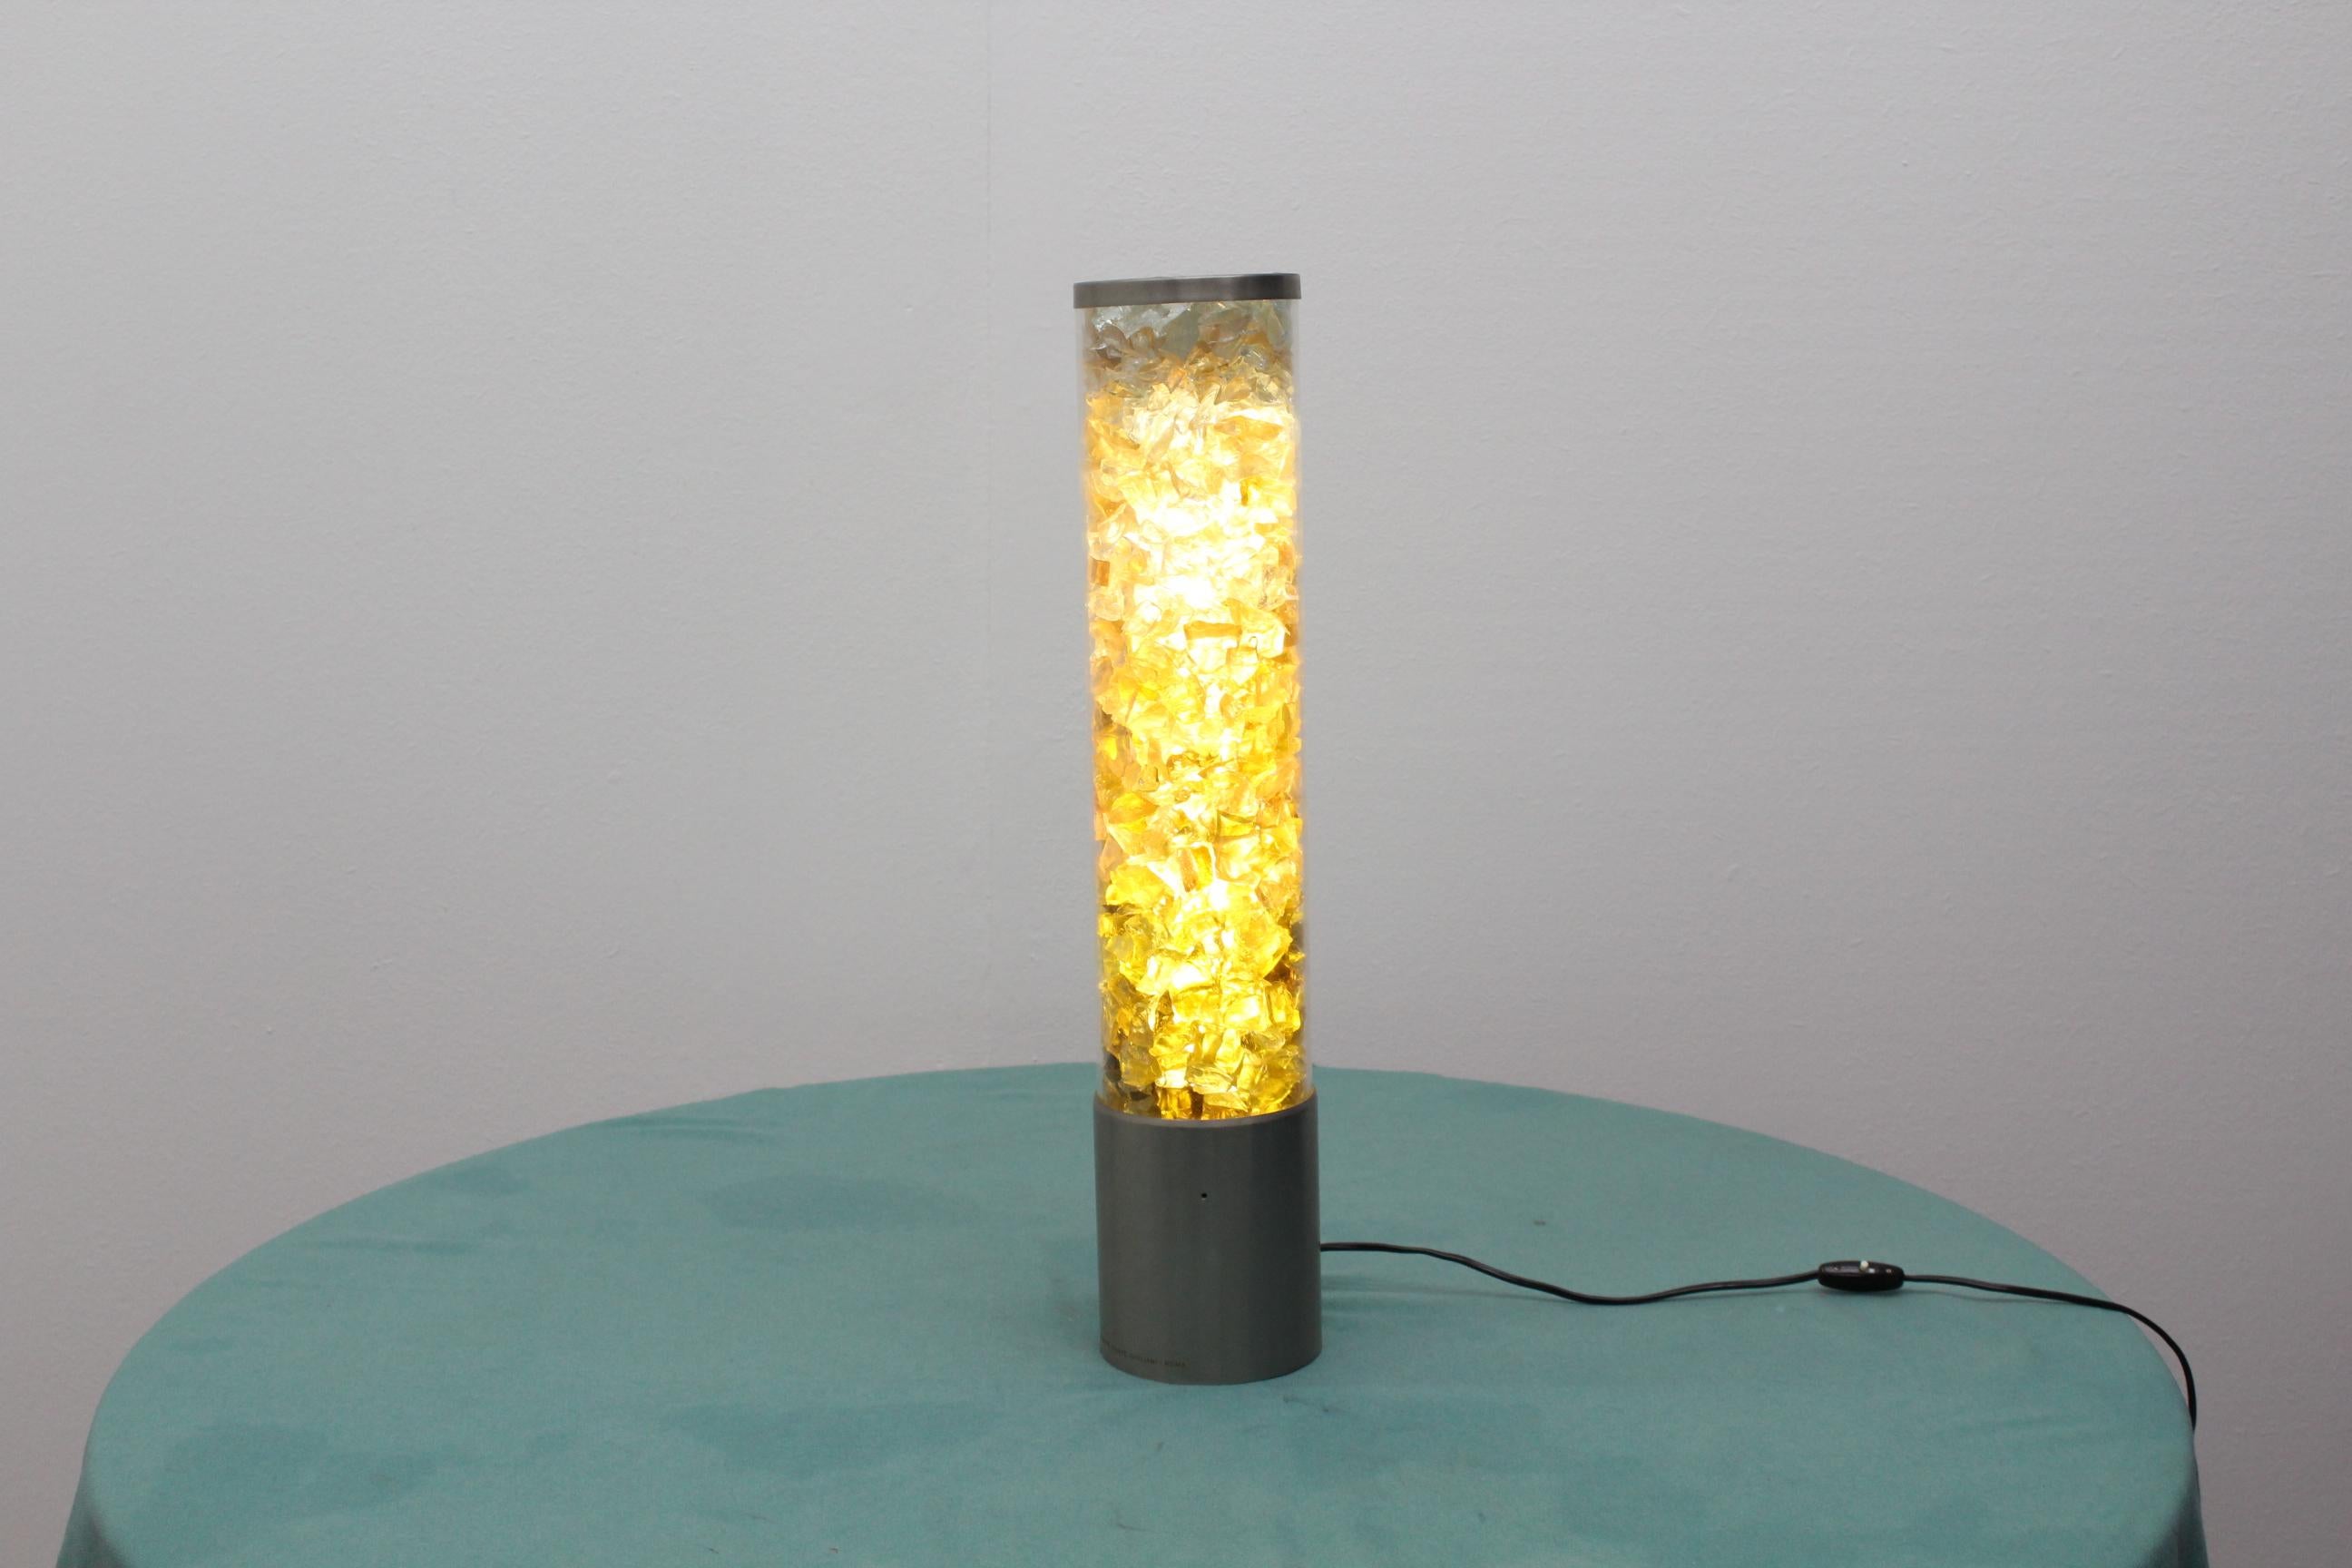 Particular floor lamp composed by a perspex tube with the inside full of multi-color fragment of glass in through which the light it's diffused. Produced by the Historical 